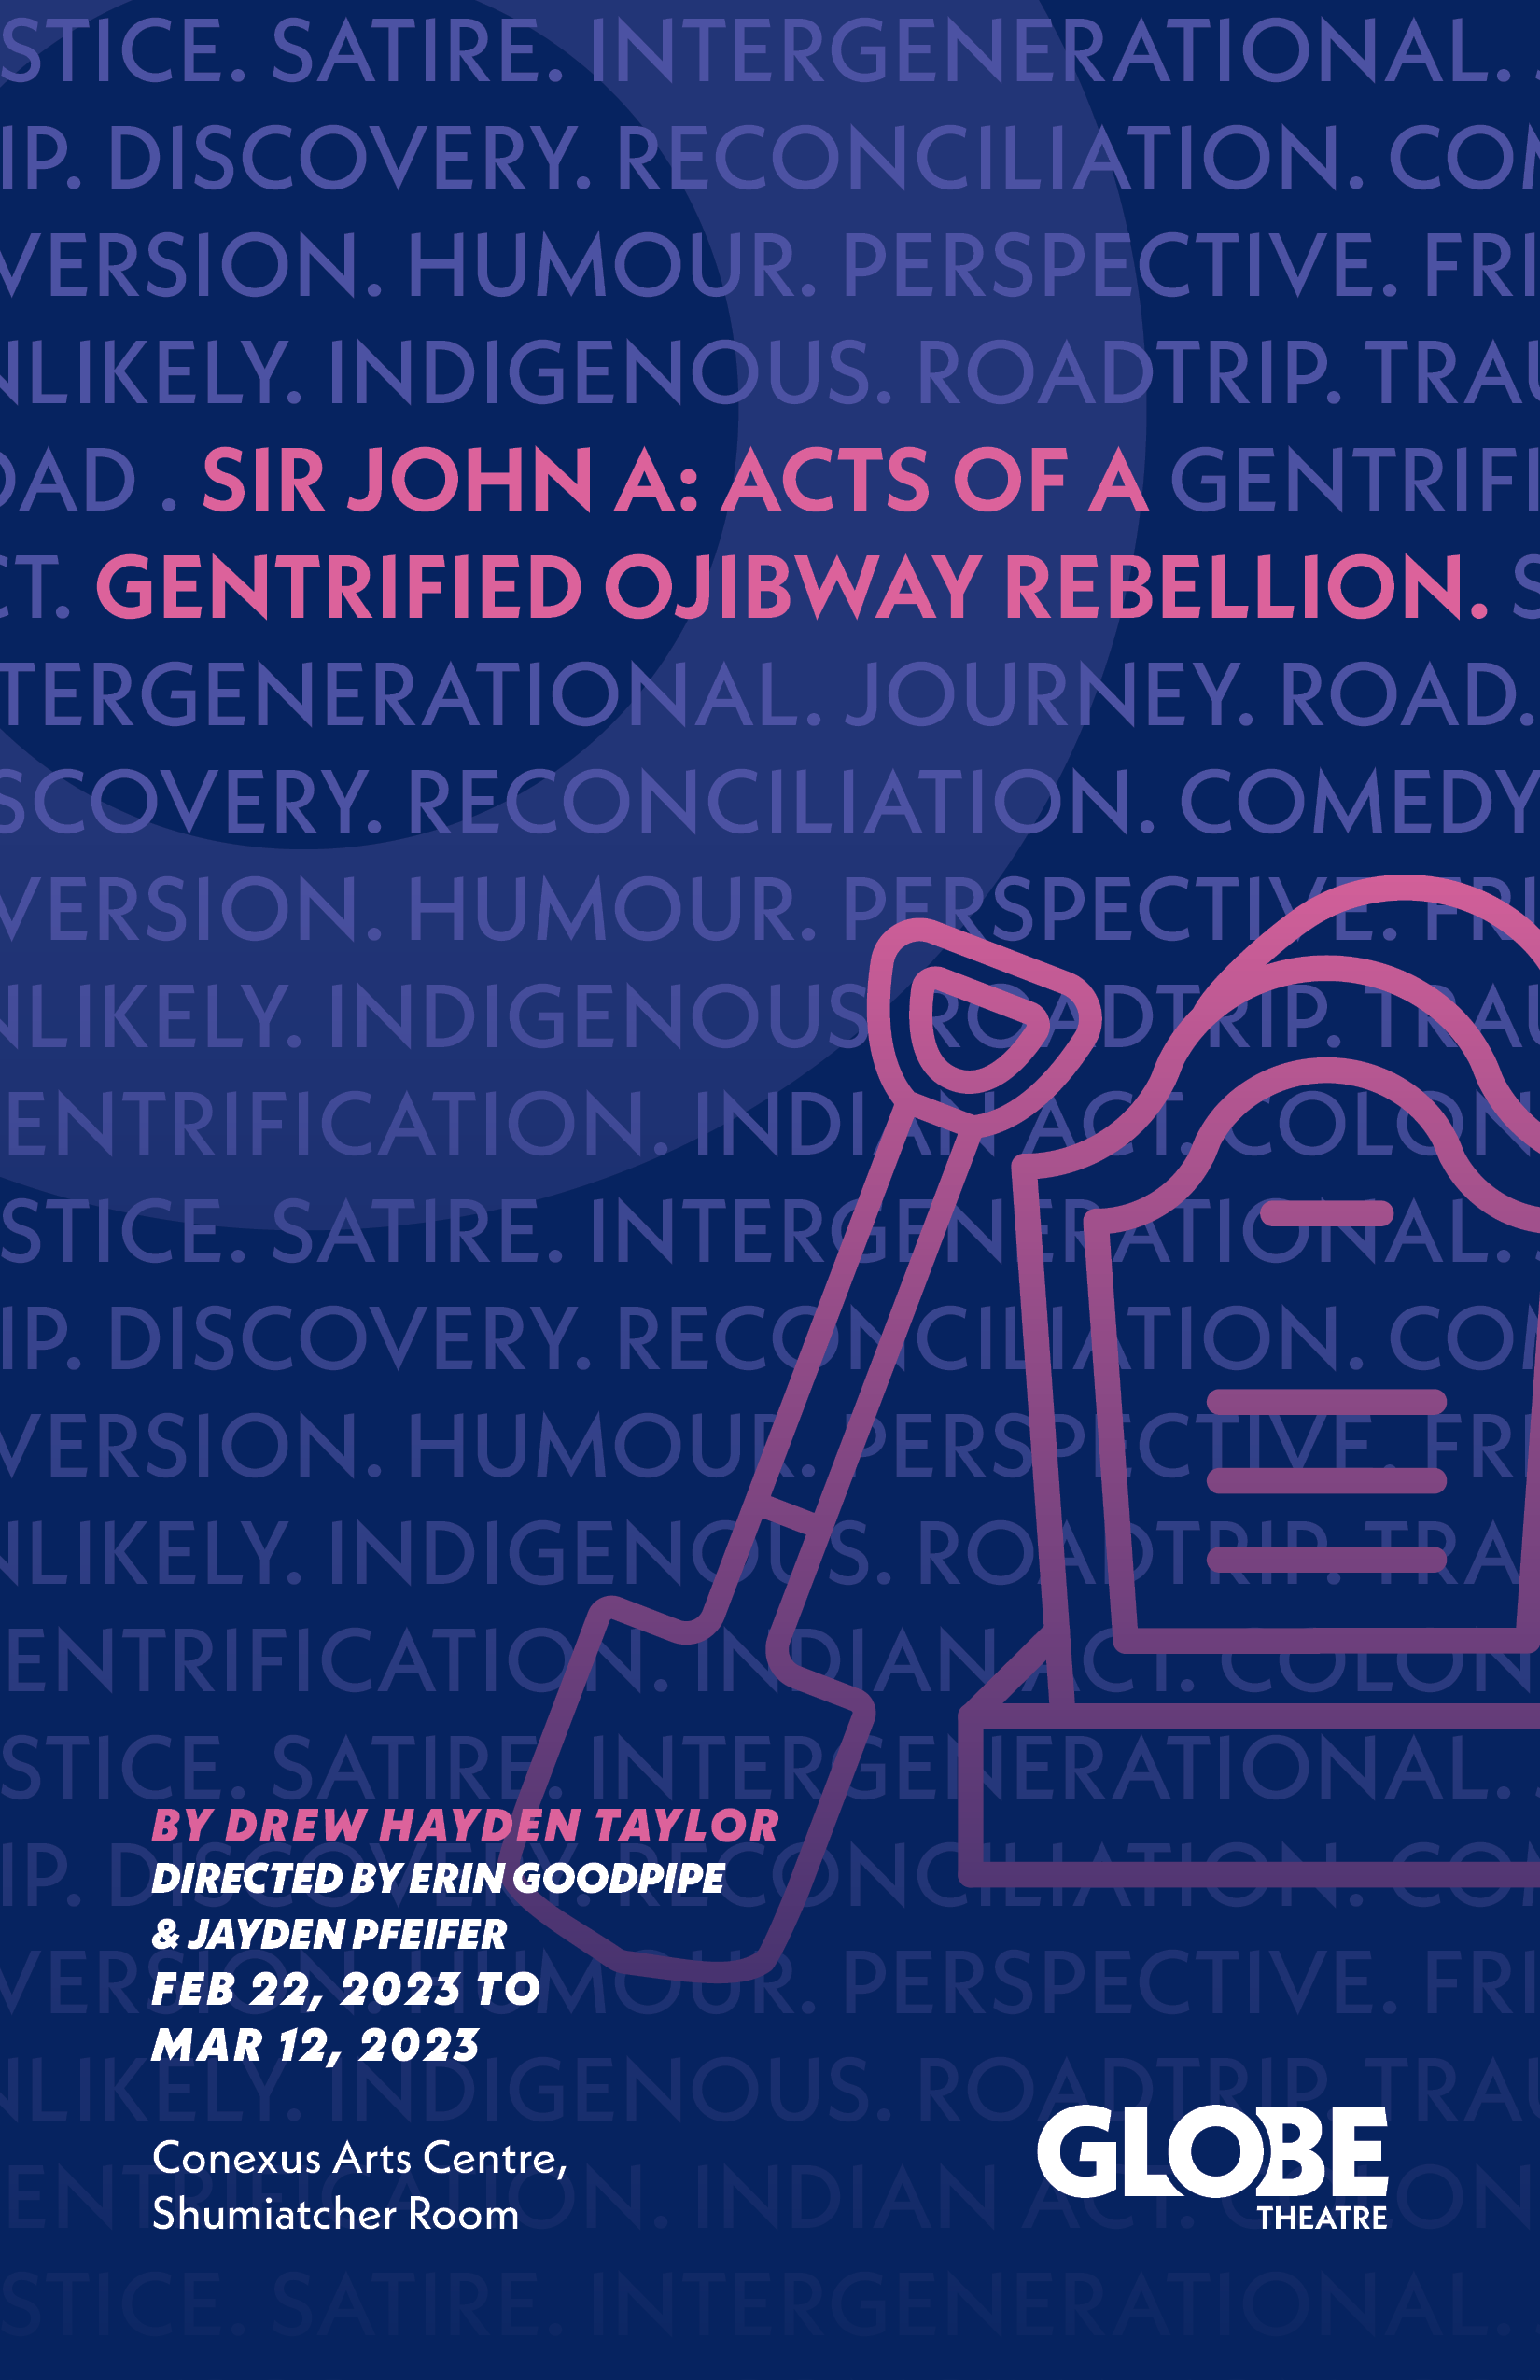 Sir John A:Acts of a Gentrified Ojibway Rebellion